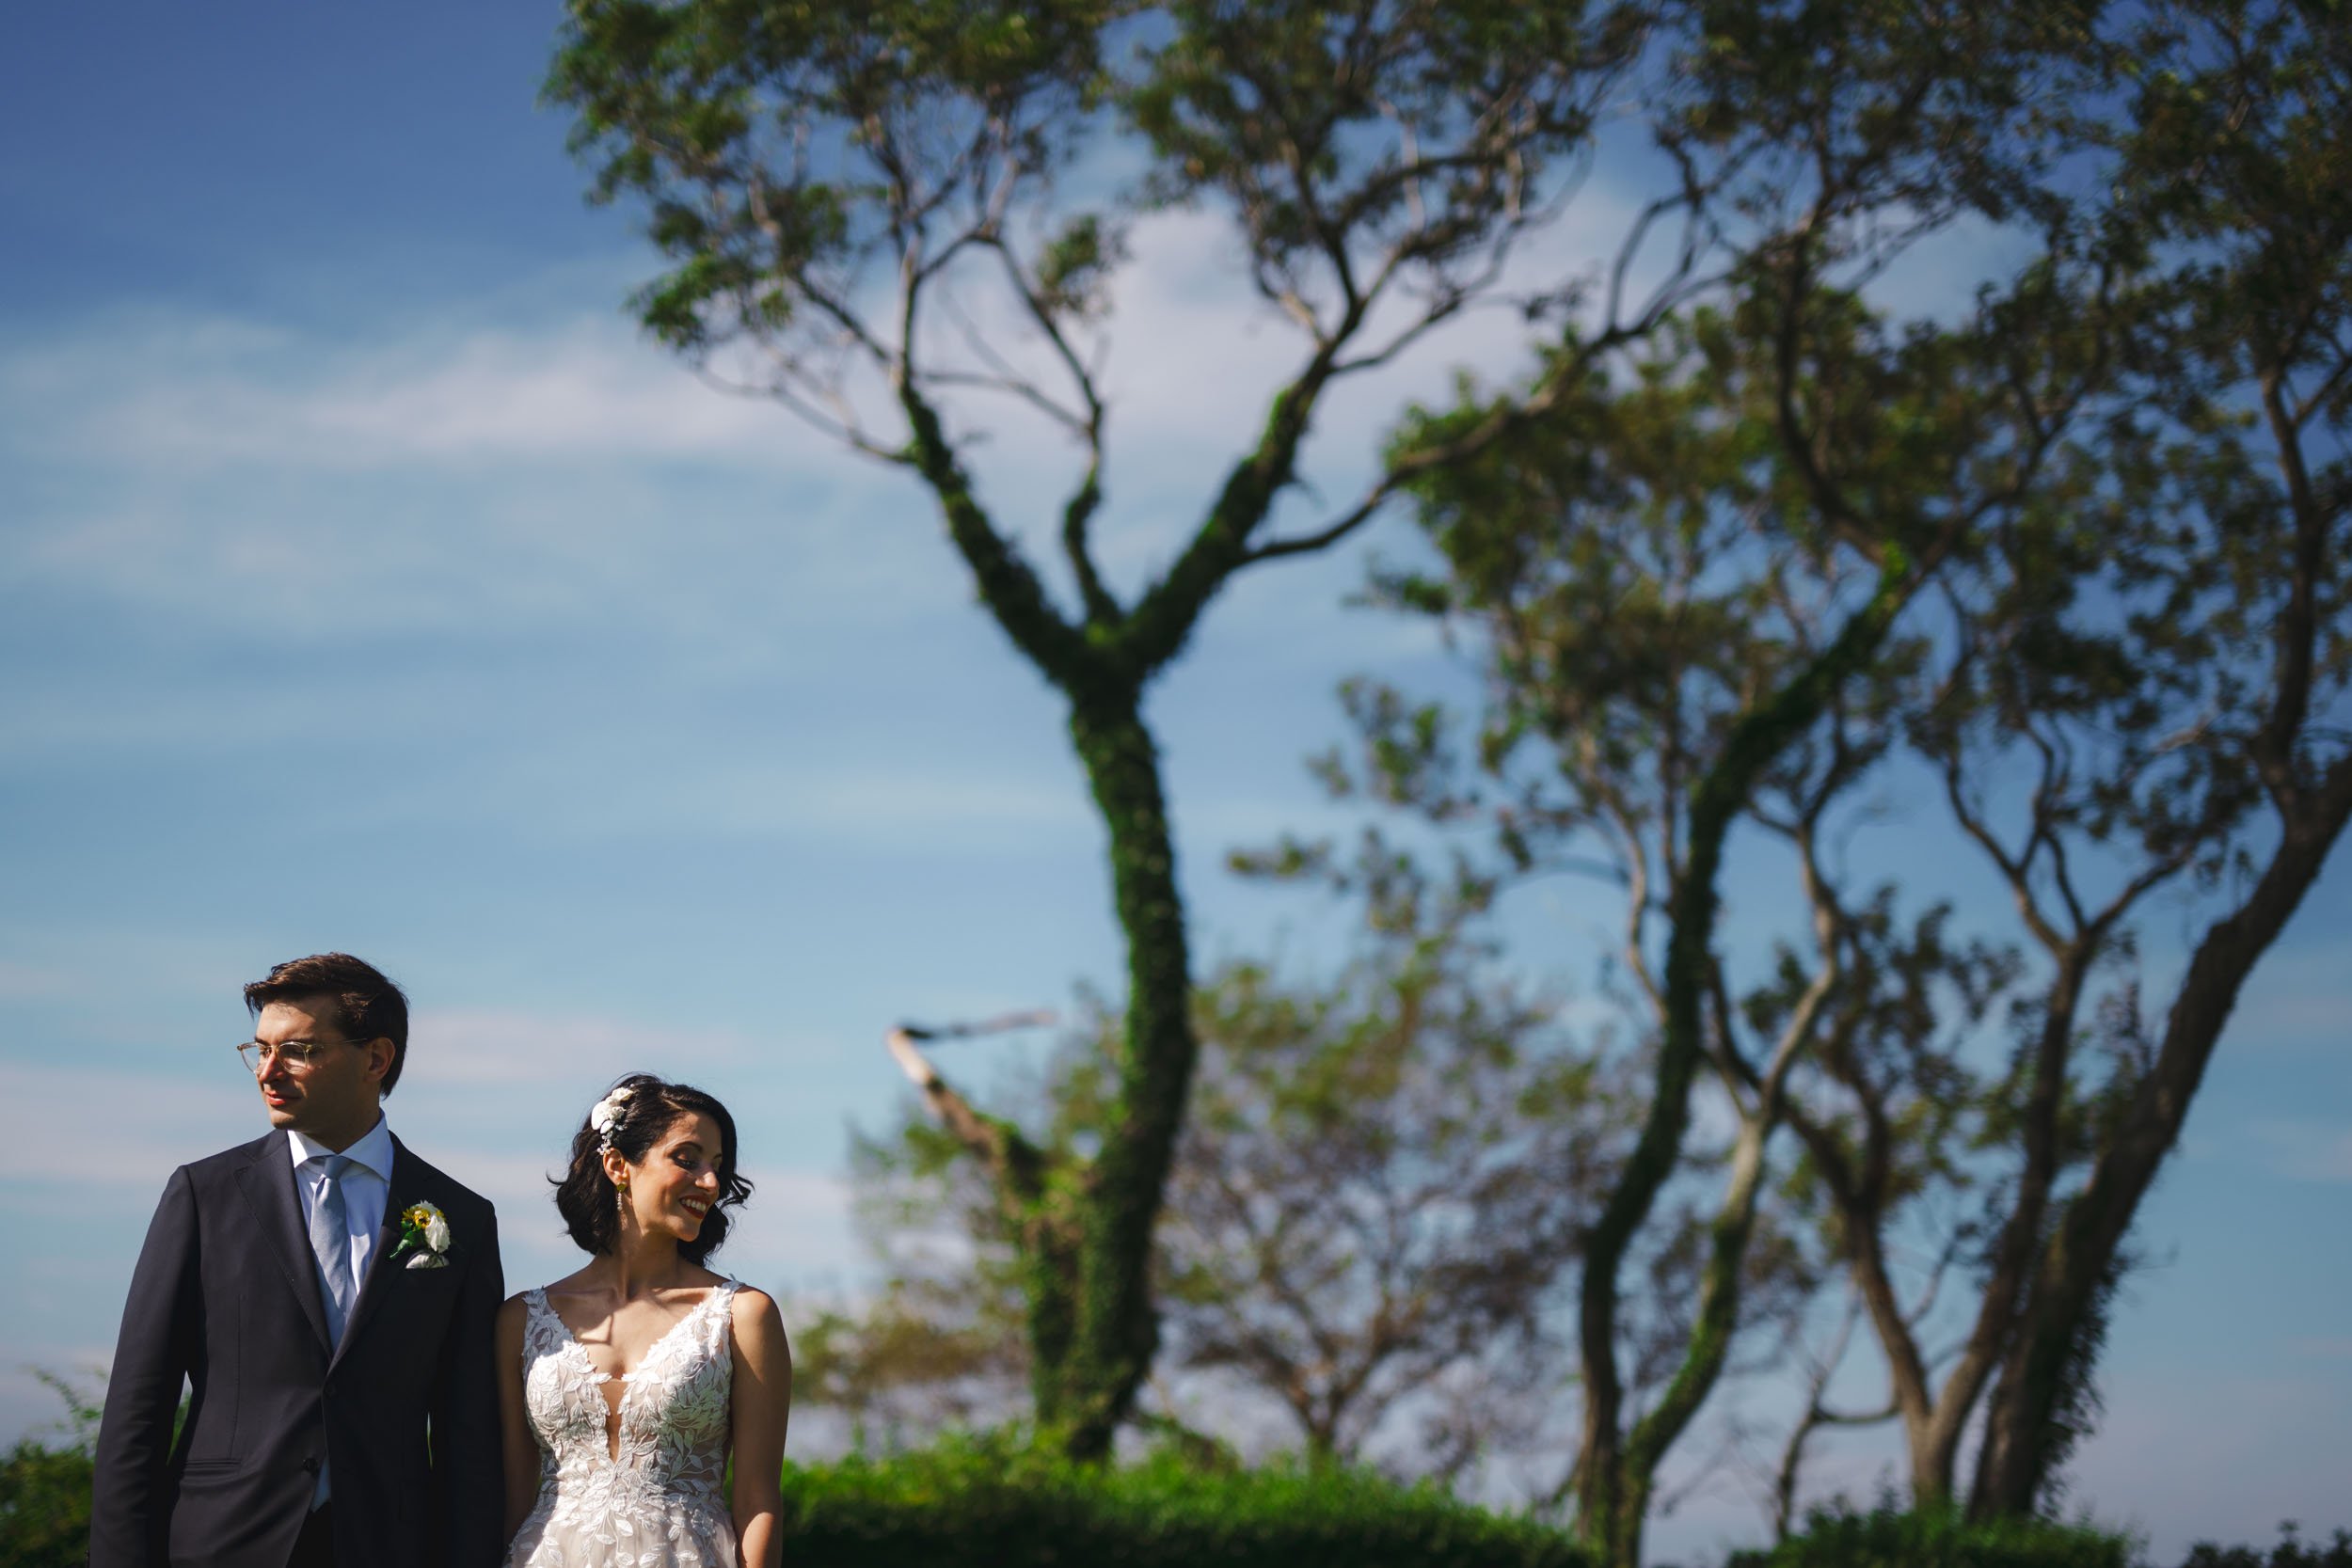  Creative portrait of a couple in front of a blue sky at Old Field Point Lighthouse, Long Island, New York wedding photography 